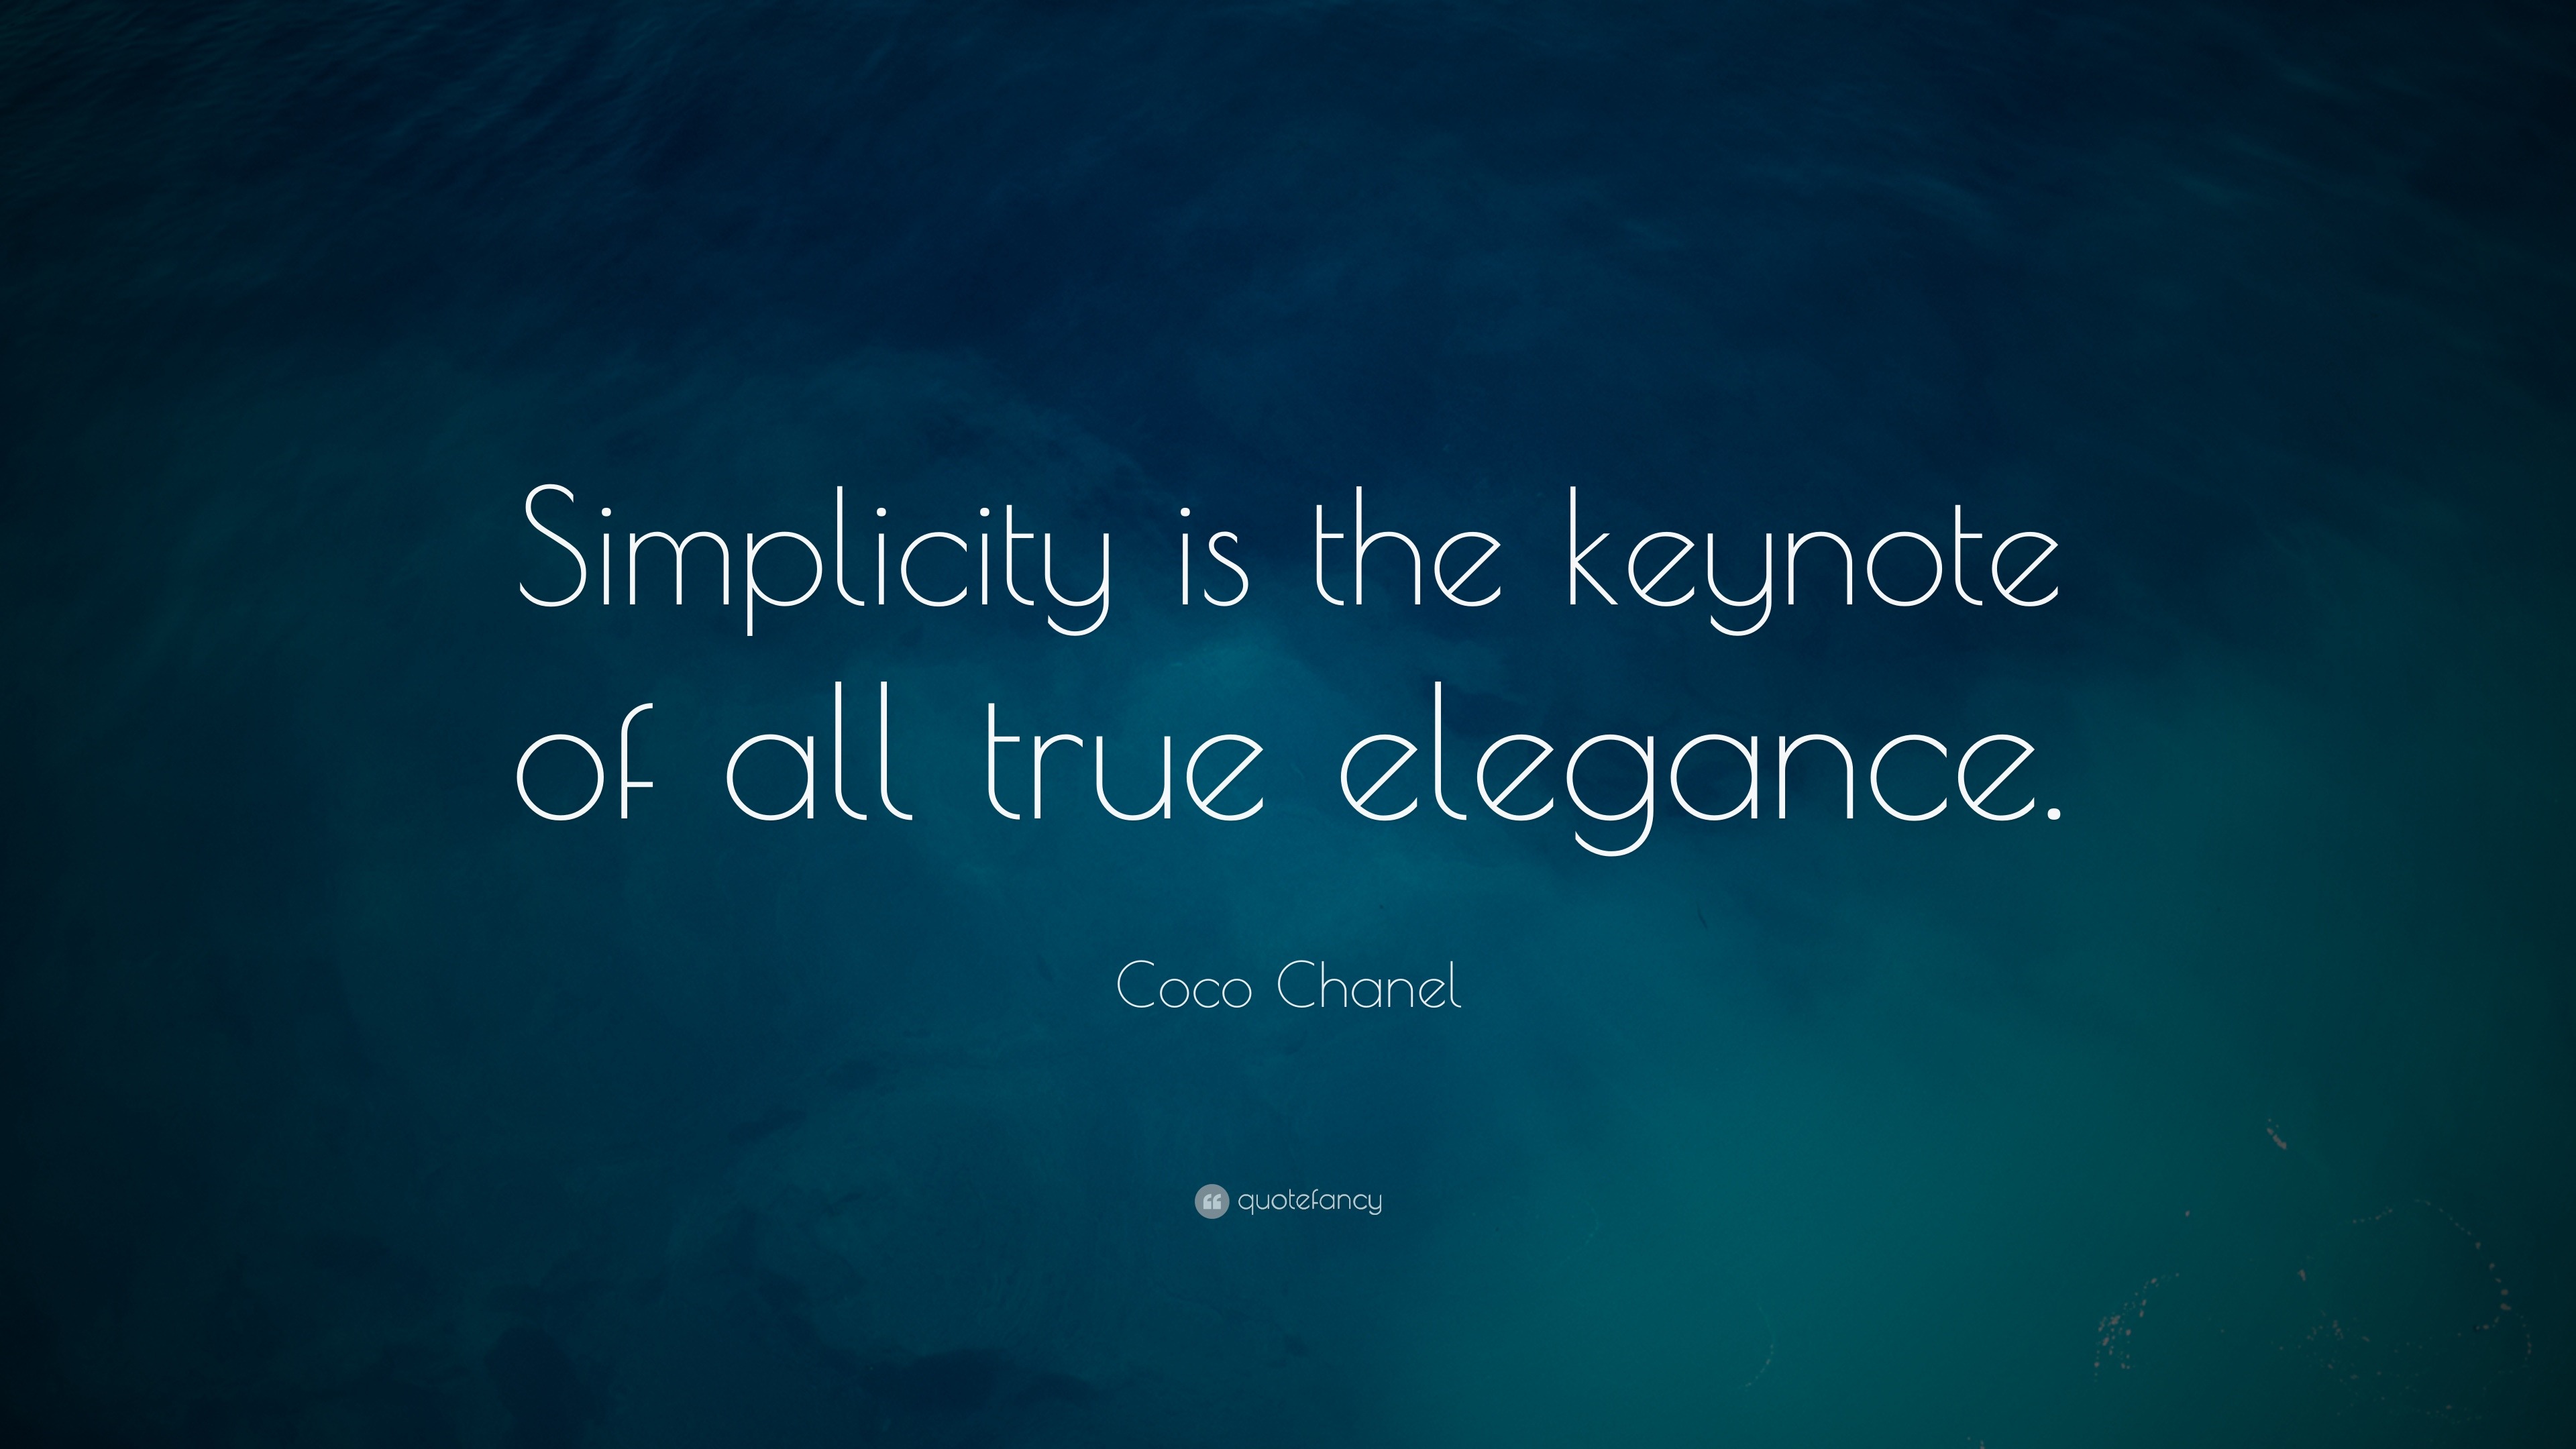 25 Coco Chanel Quotes Every Woman Should Live By - Best Coco